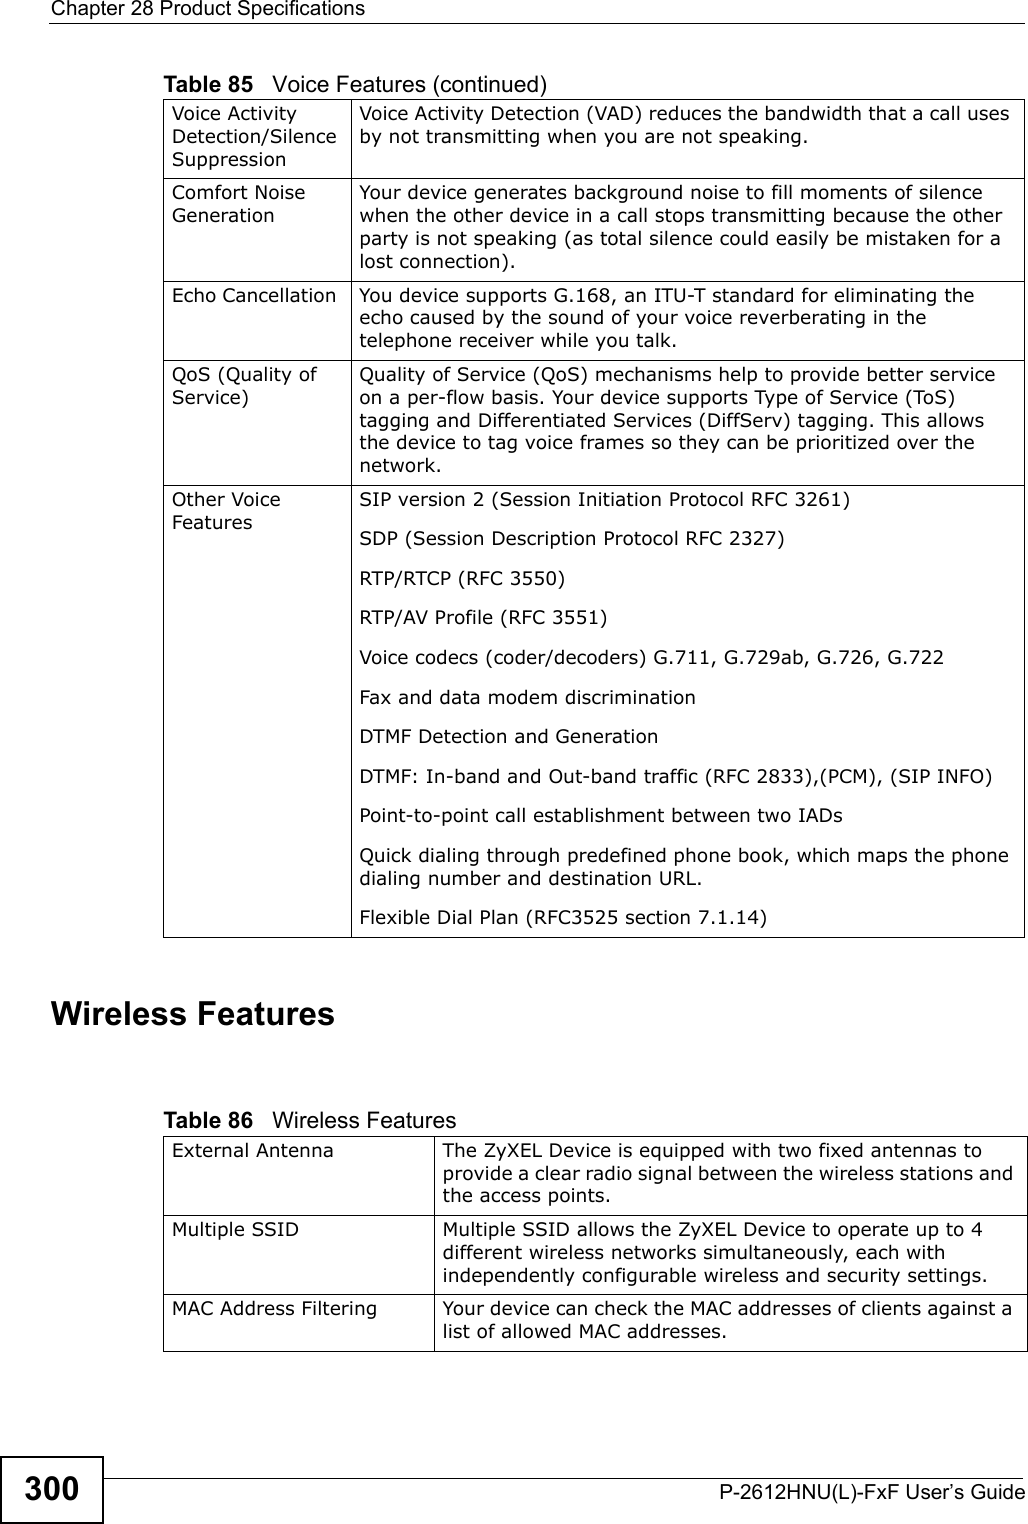 Chapter 28 Product SpecificationsP-2612HNU(L)-FxF User’s Guide300Wireless Features Voice ActivityDetection/Silence SuppressionVoice Activity Detection (VAD) reduces the bandwidth that a call uses by not transmitting when you are not speaking. Comfort Noise GenerationYour device generates background noise to fill moments of silence when the other device in a call stops transmitting because the other party is not speaking (as total silence could easily be mistaken for a lost connection). Echo Cancellation You device supports G.168, an ITU-T standard for eliminating the echo caused by the sound of your voice reverberating in the telephone receiver while you talk.QoS (Quality of Service) Quality of Service (QoS) mechanisms help to provide better service on a per-flow basis. Your device supports Type of Service (ToS) tagging and Differentiated Services (DiffServ) tagging. This allows the device to tag voice frames so they can be prioritized over the network.Other VoiceFeaturesSIP version 2 (Session Initiation Protocol RFC 3261)SDP (Session Description Protocol RFC 2327)RTP/RTCP (RFC 3550)RTP/AV Profile (RFC 3551)Voice codecs (coder/decoders) G.711, G.729ab, G.726, G.722Fax and data modem discriminationDTMF Detection and GenerationDTMF: In-band and Out-band traffic (RFC 2833),(PCM), (SIP INFO) Point-to-point call establishment between two IADs Quick dialing through predefined phone book, which maps the phone dialing number and destination URL.Flexible Dial Plan (RFC3525 section 7.1.14)Table 85   Voice Features (continued)Table 86   Wireless FeaturesExternal Antenna  The ZyXEL Device is equipped with two fixed antennas to provide a clear radio signal between the wireless stations and the access points.Multiple SSID Multiple SSID allows the ZyXEL Device to operate up to 4 different wireless networks simultaneously, each with independently configurable wireless and security settings.MAC Address Filtering  Your device can check the MAC addresses of clients against a list of allowed MAC addresses.